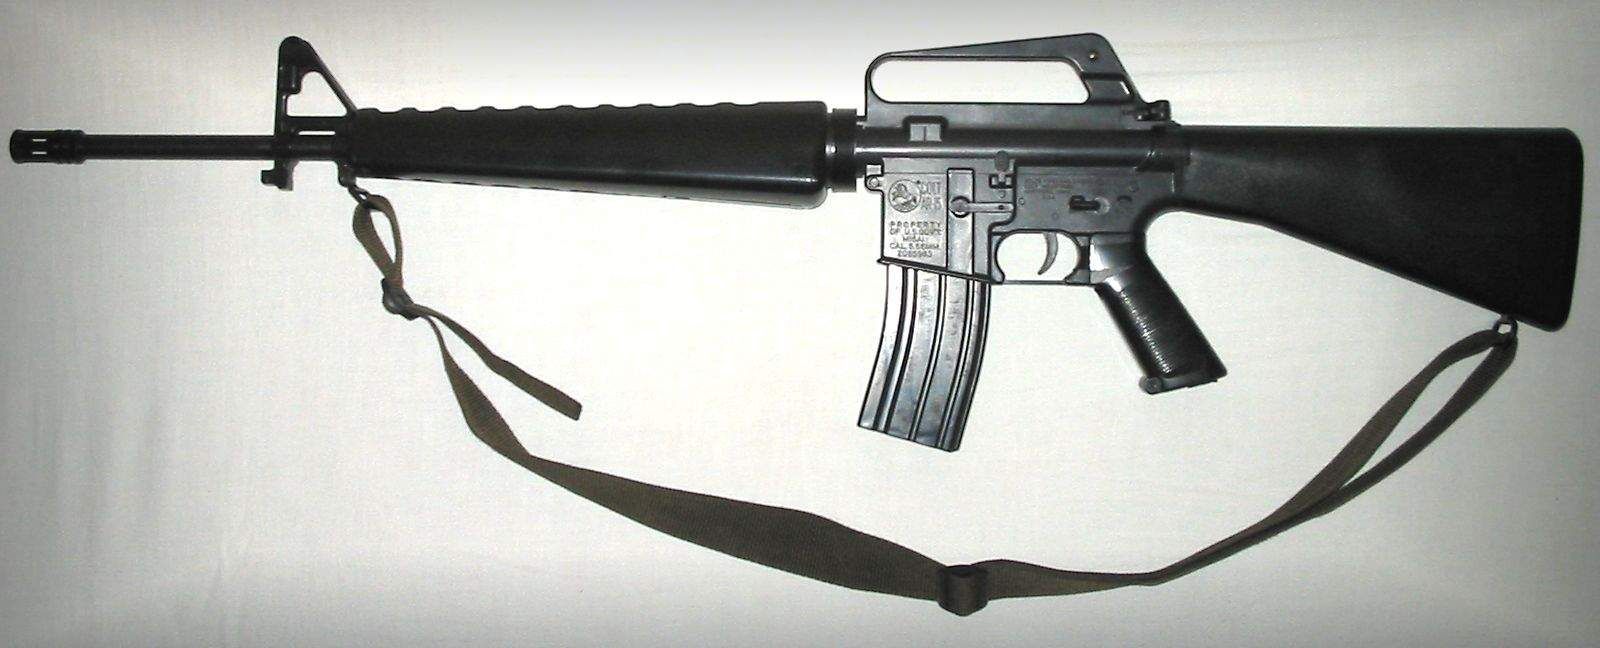 Deadly M-16 Rifle.